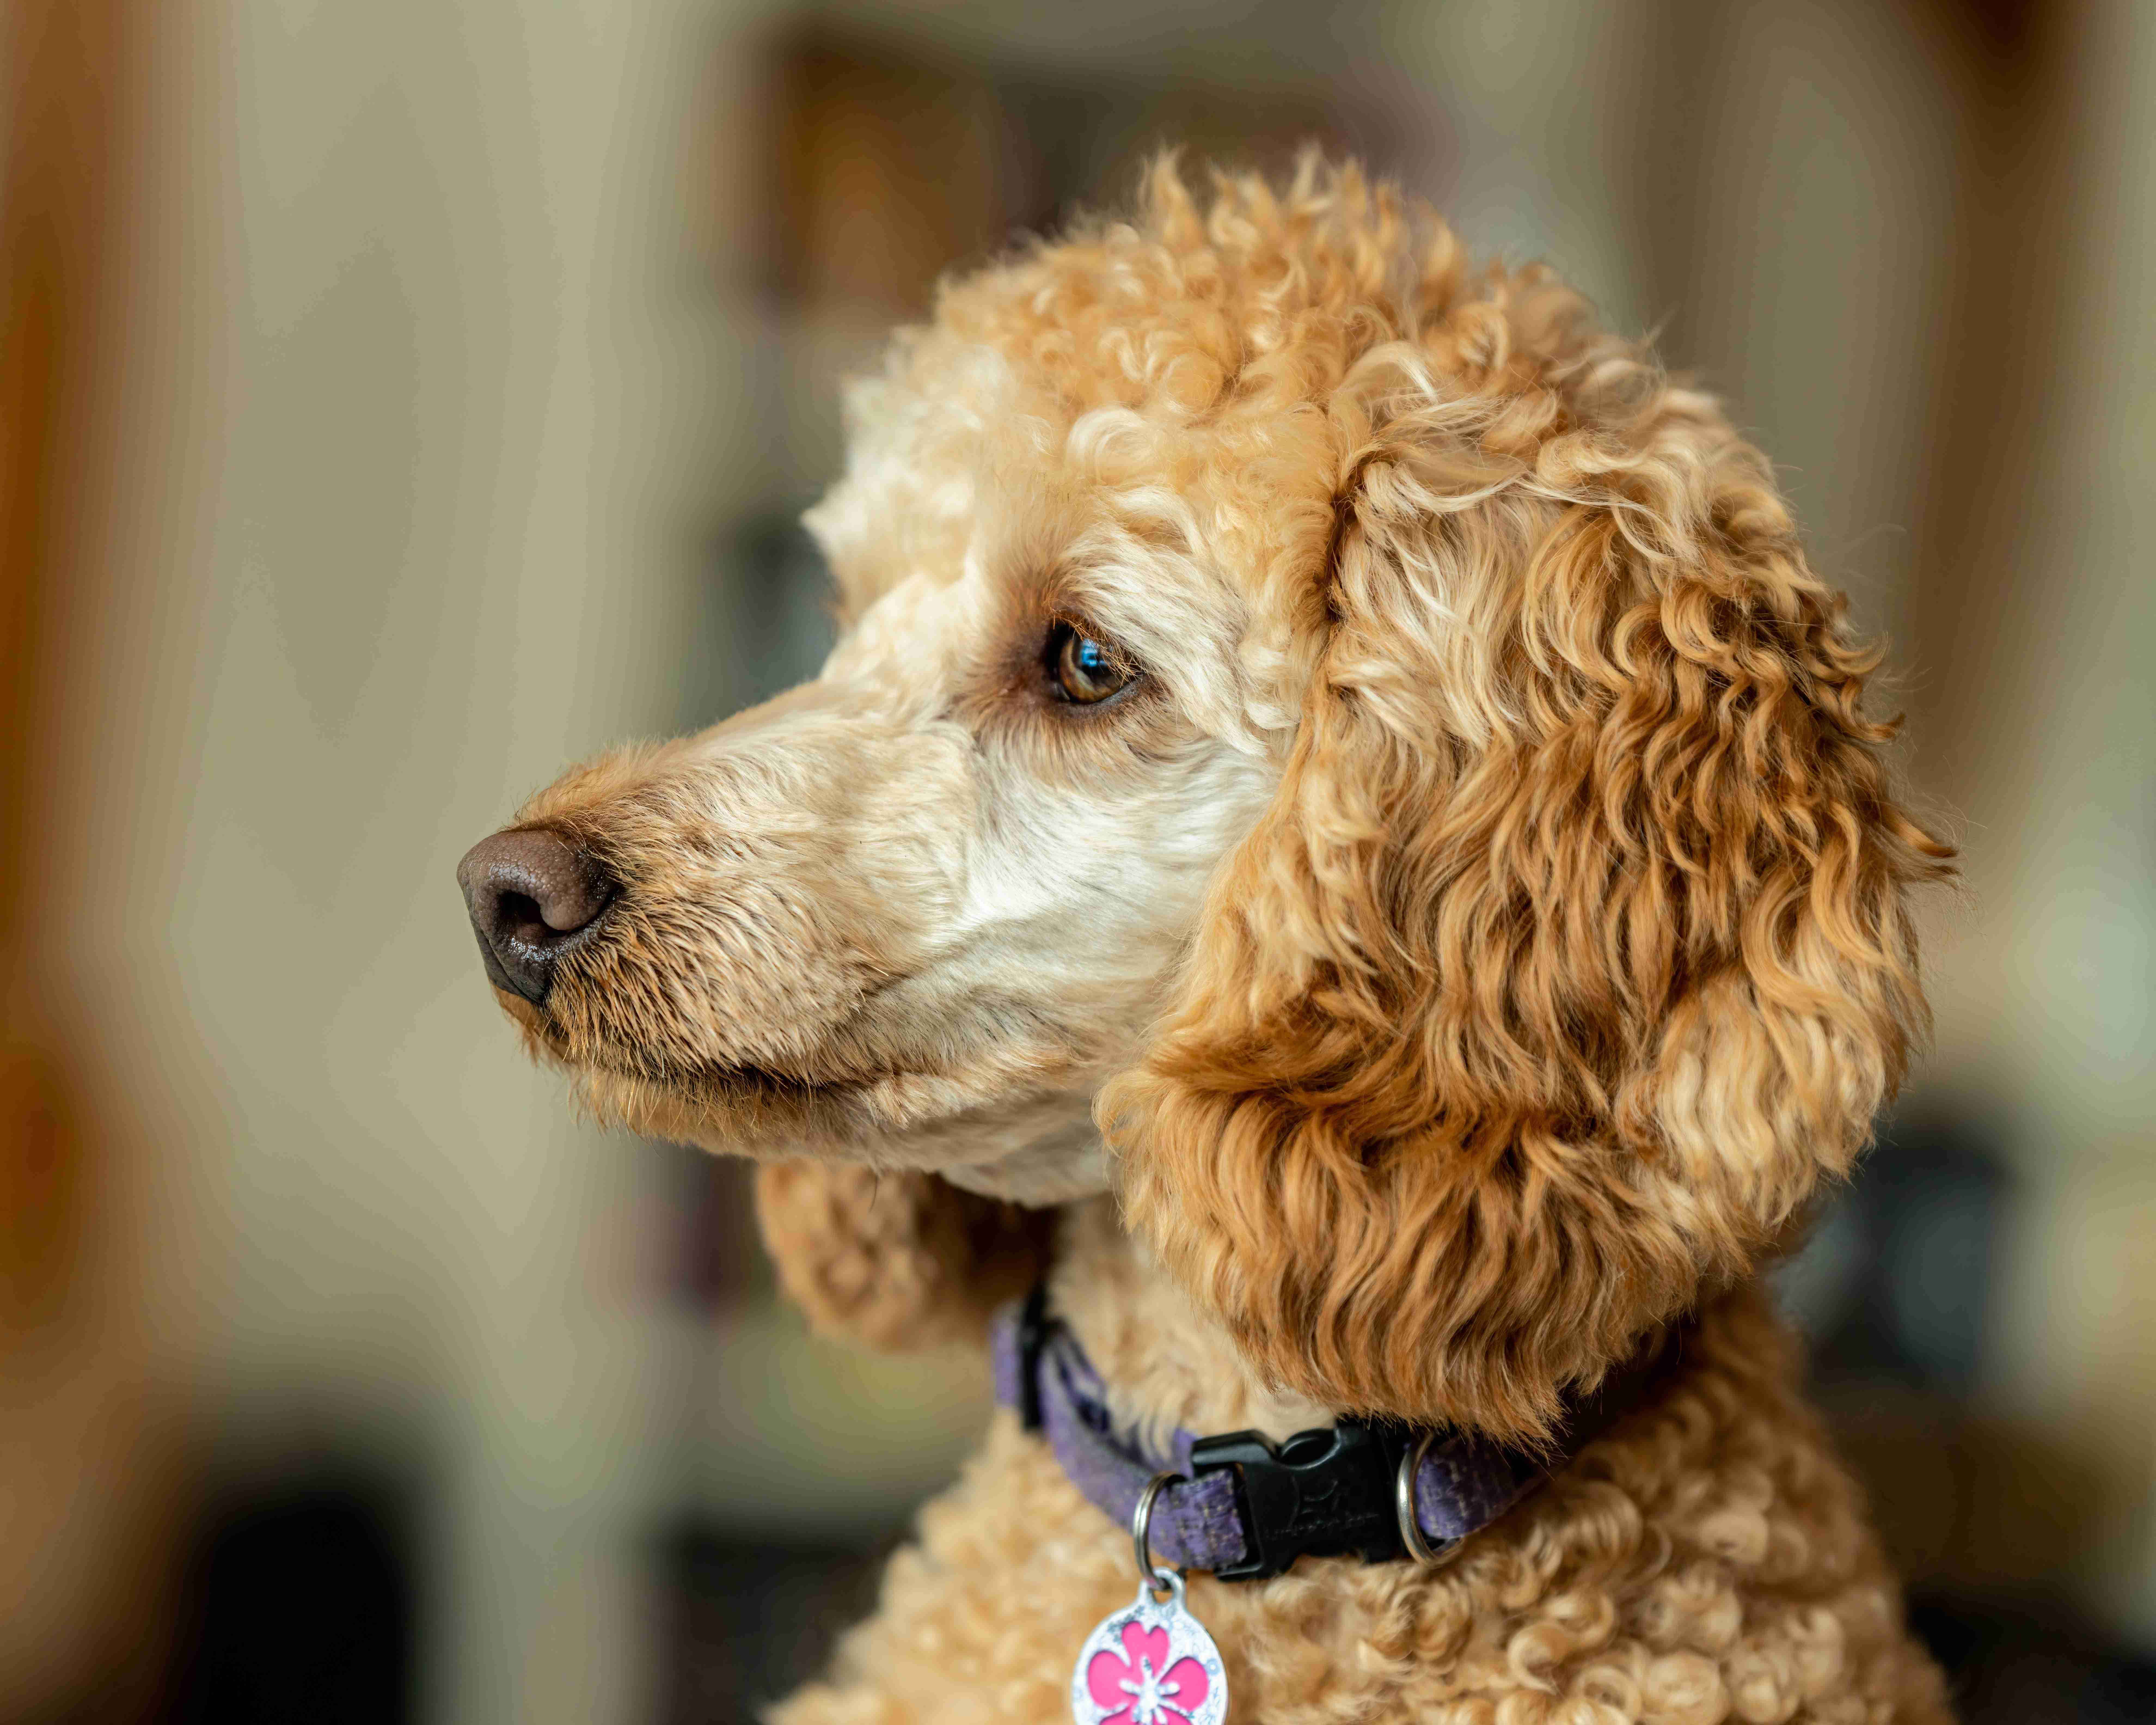 How does a Poodle's coat affect their overall health?